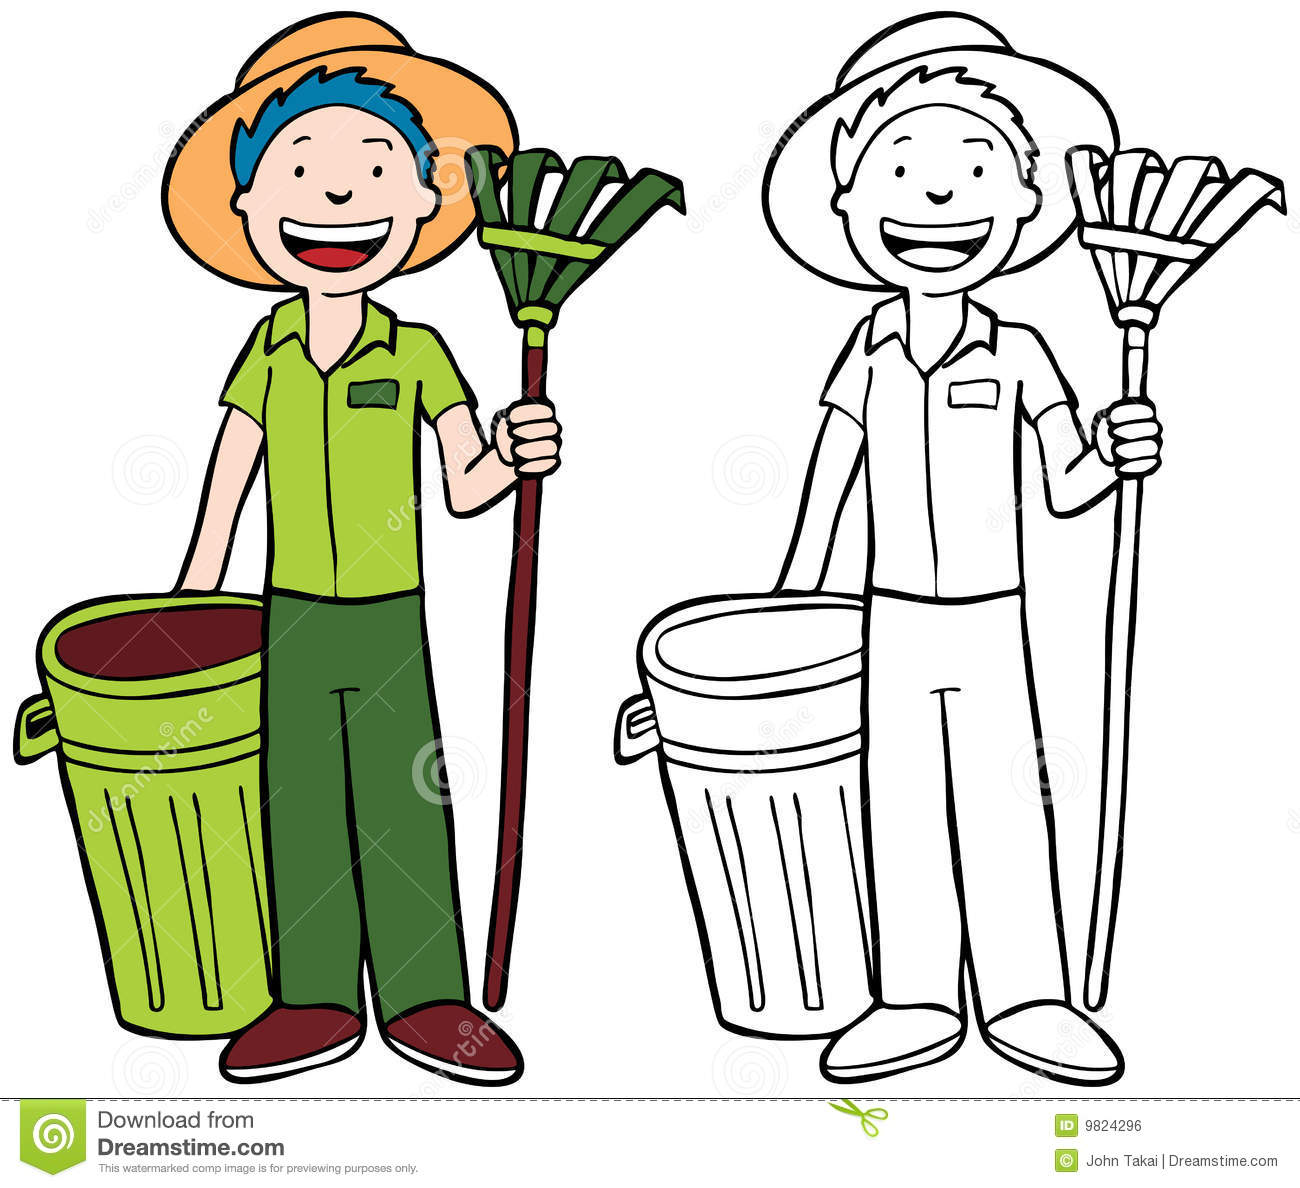 Yard Cleaning Clipart   Cliparthut   Free Clipart